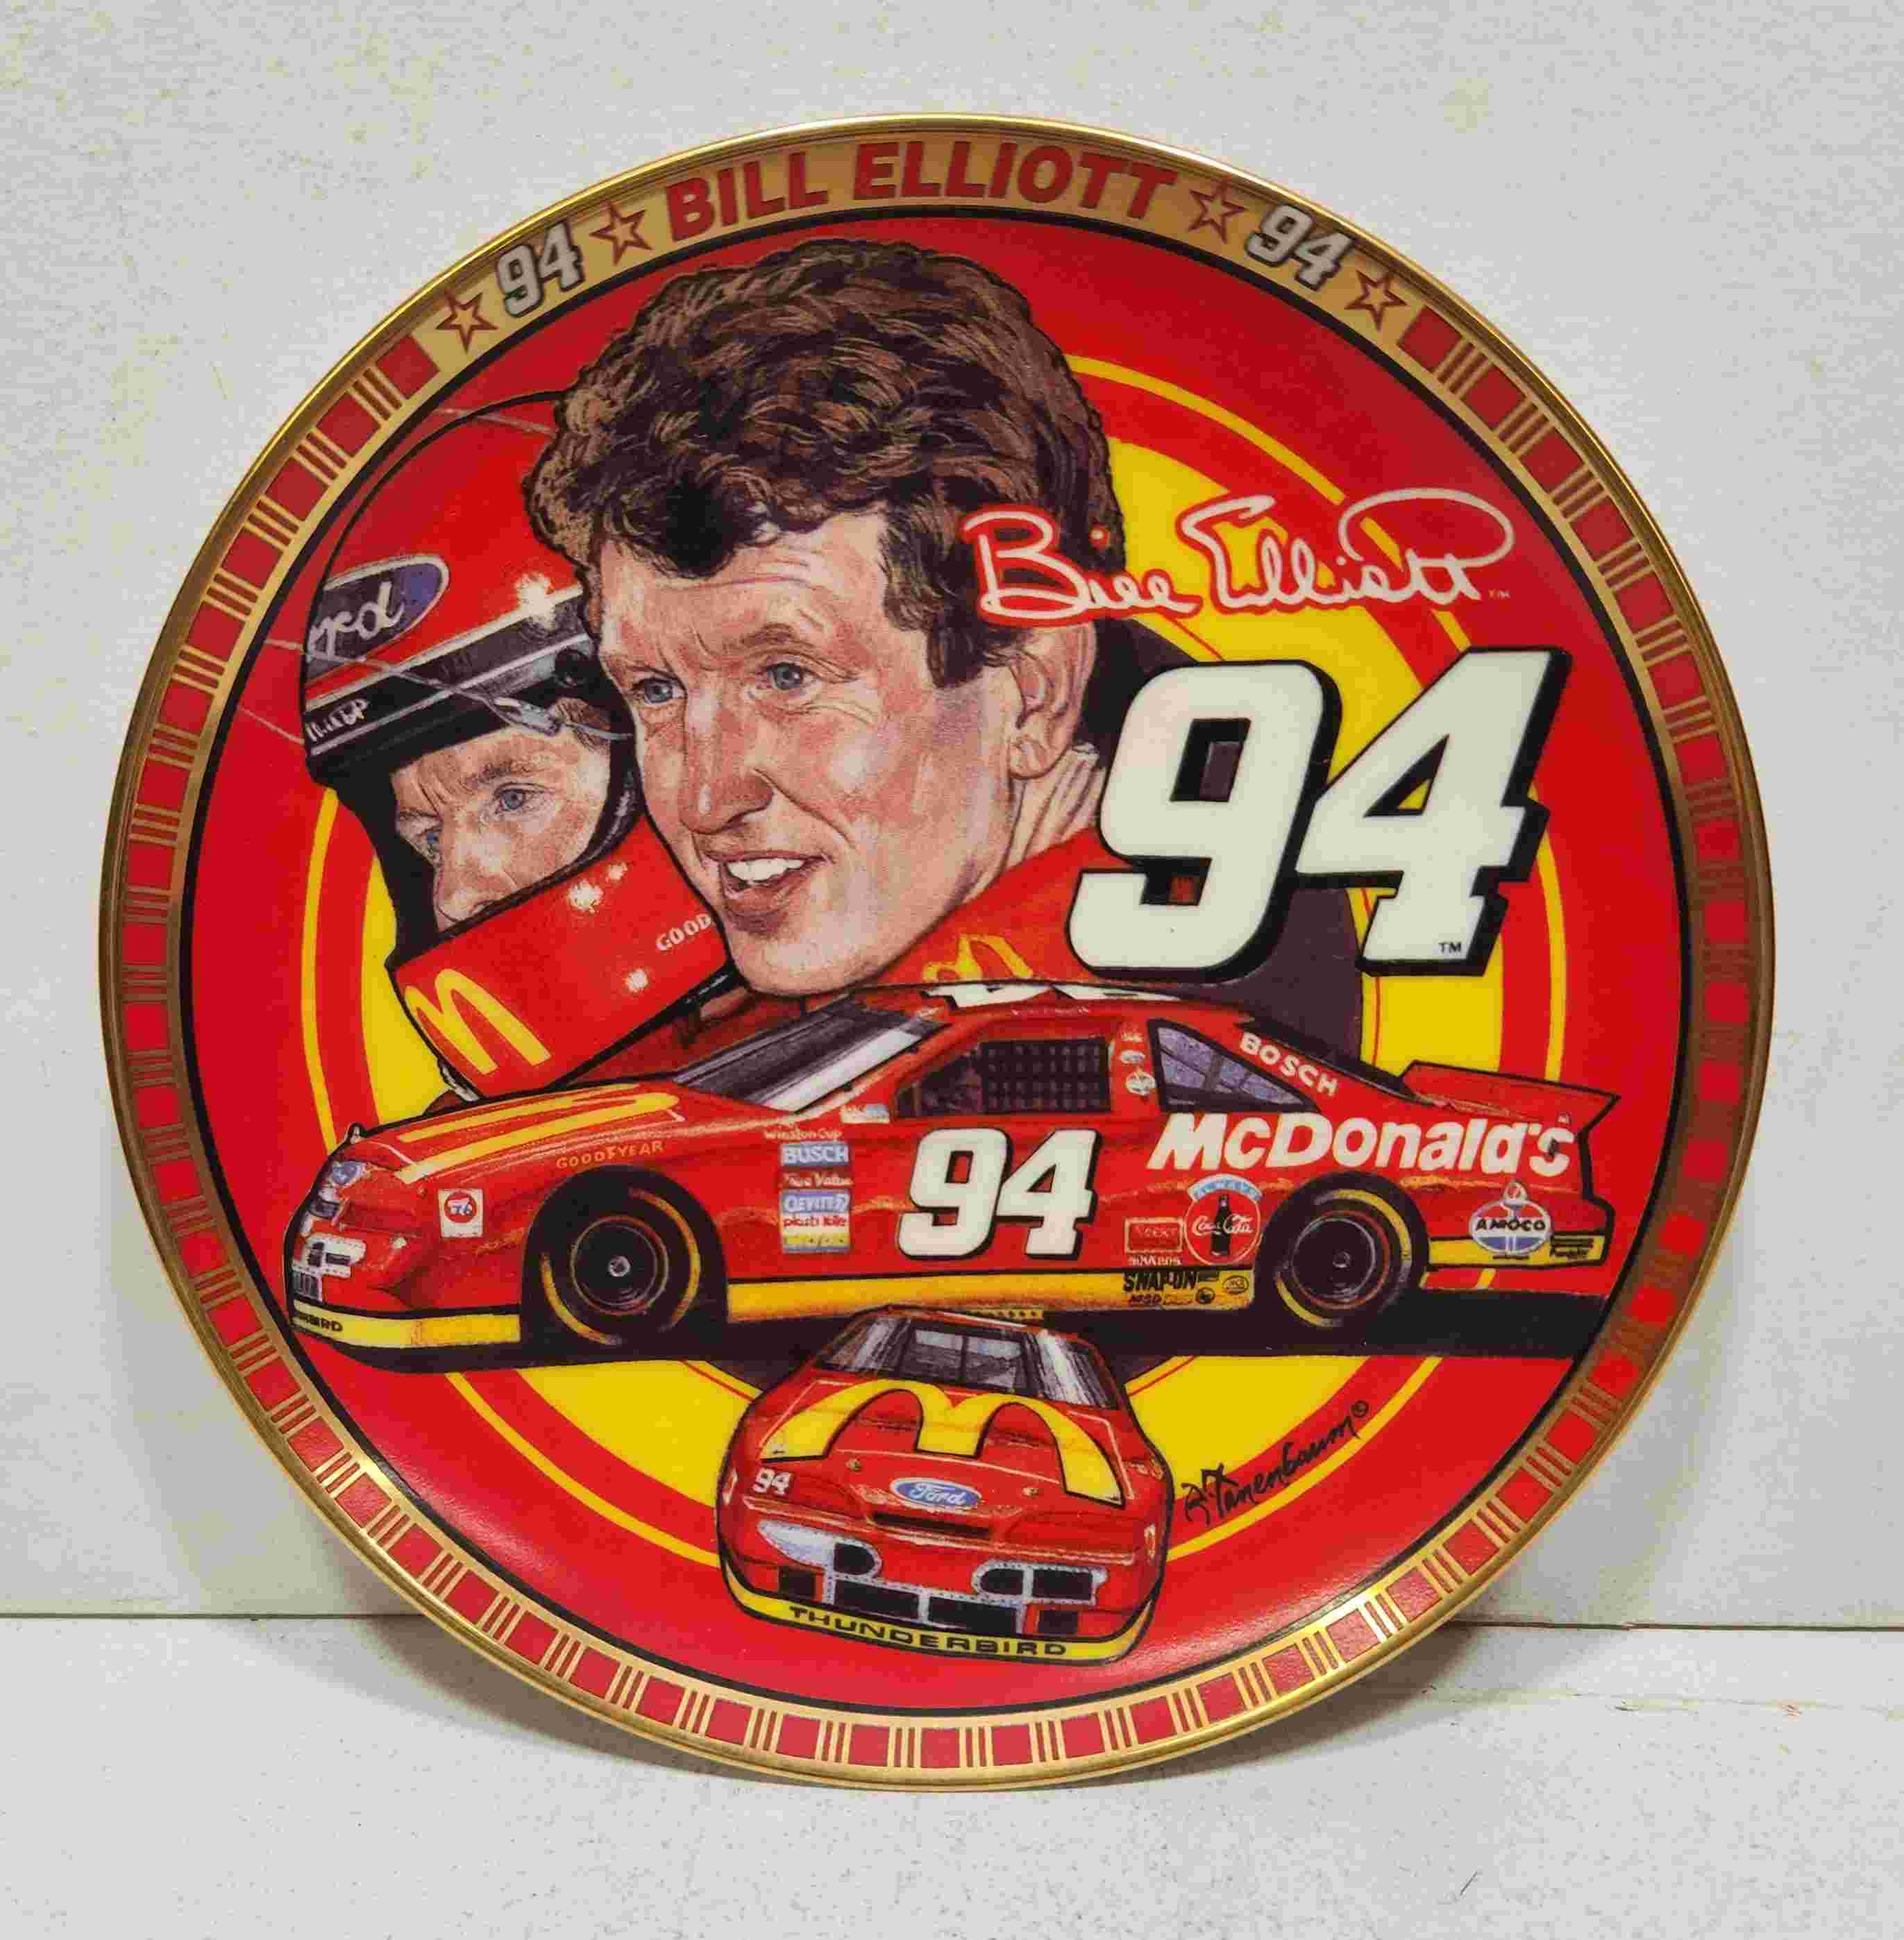 1996 Bill Elliott Drivers of Victory Lane by The Hamilton Collection